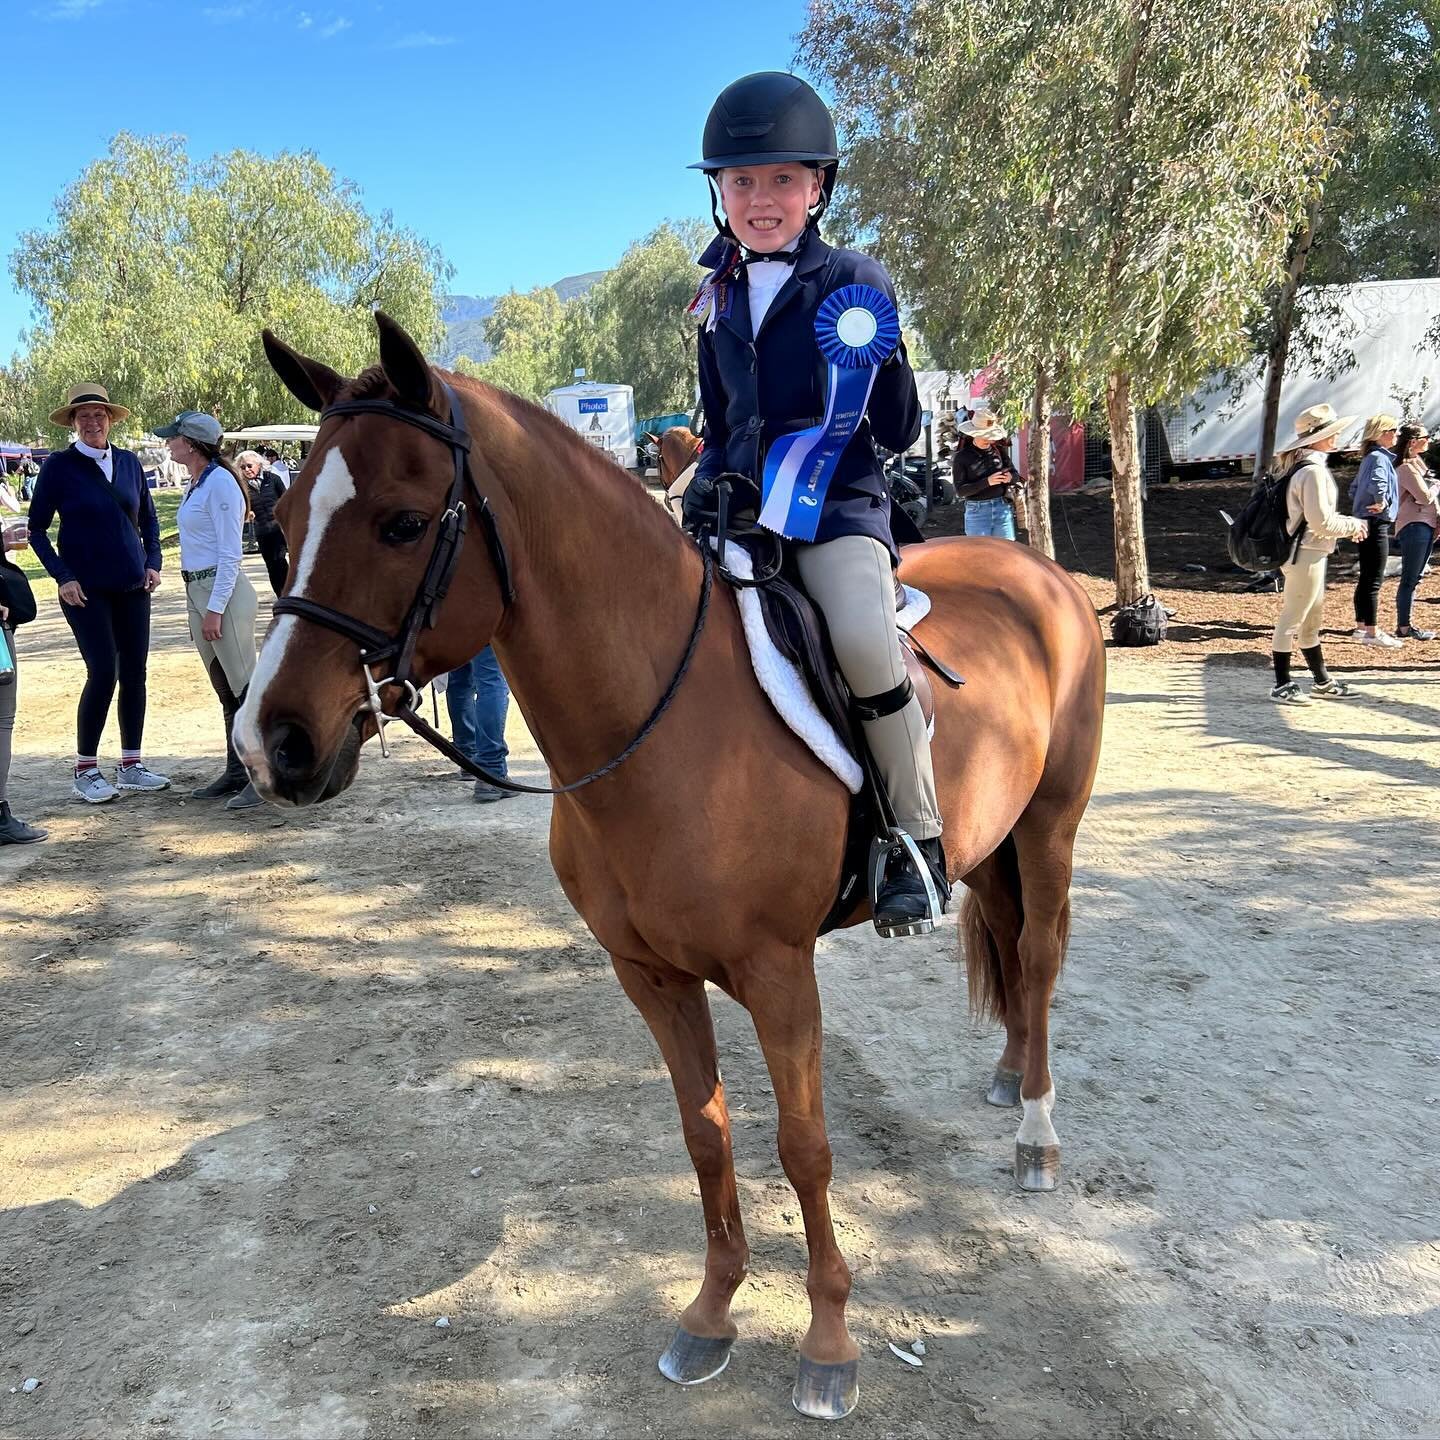 Outstanding week for Grace Green and Roll Call who claimed the Reserve Championship in two divisions! This pair took home a tricolor in the Schooling Ponies and the Small Pony Hunters with two wins in the Rated Division🥇🥇

#Sunnybrook #SB #JumpNEE 